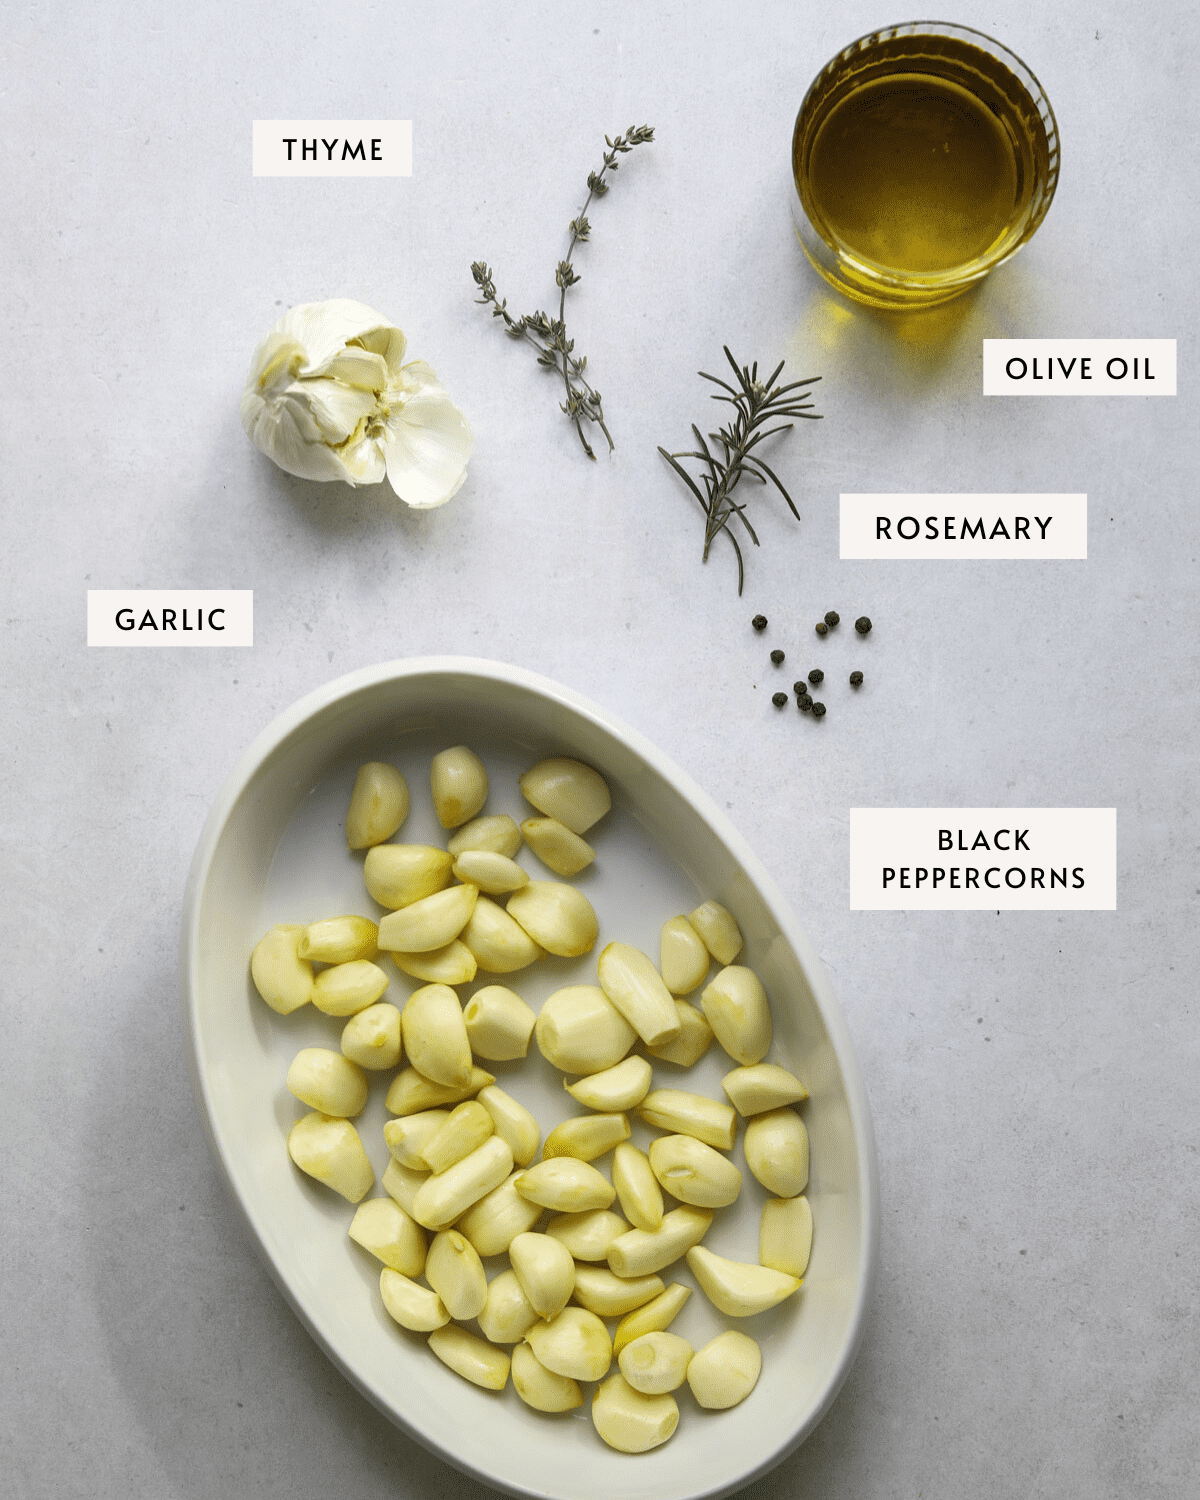 a white oval baking dish filled with raw garlic cloves, a whole head of garlic, black peppercorns, a glass dish of olive oil, sprigs of fresh rosemary and thyme